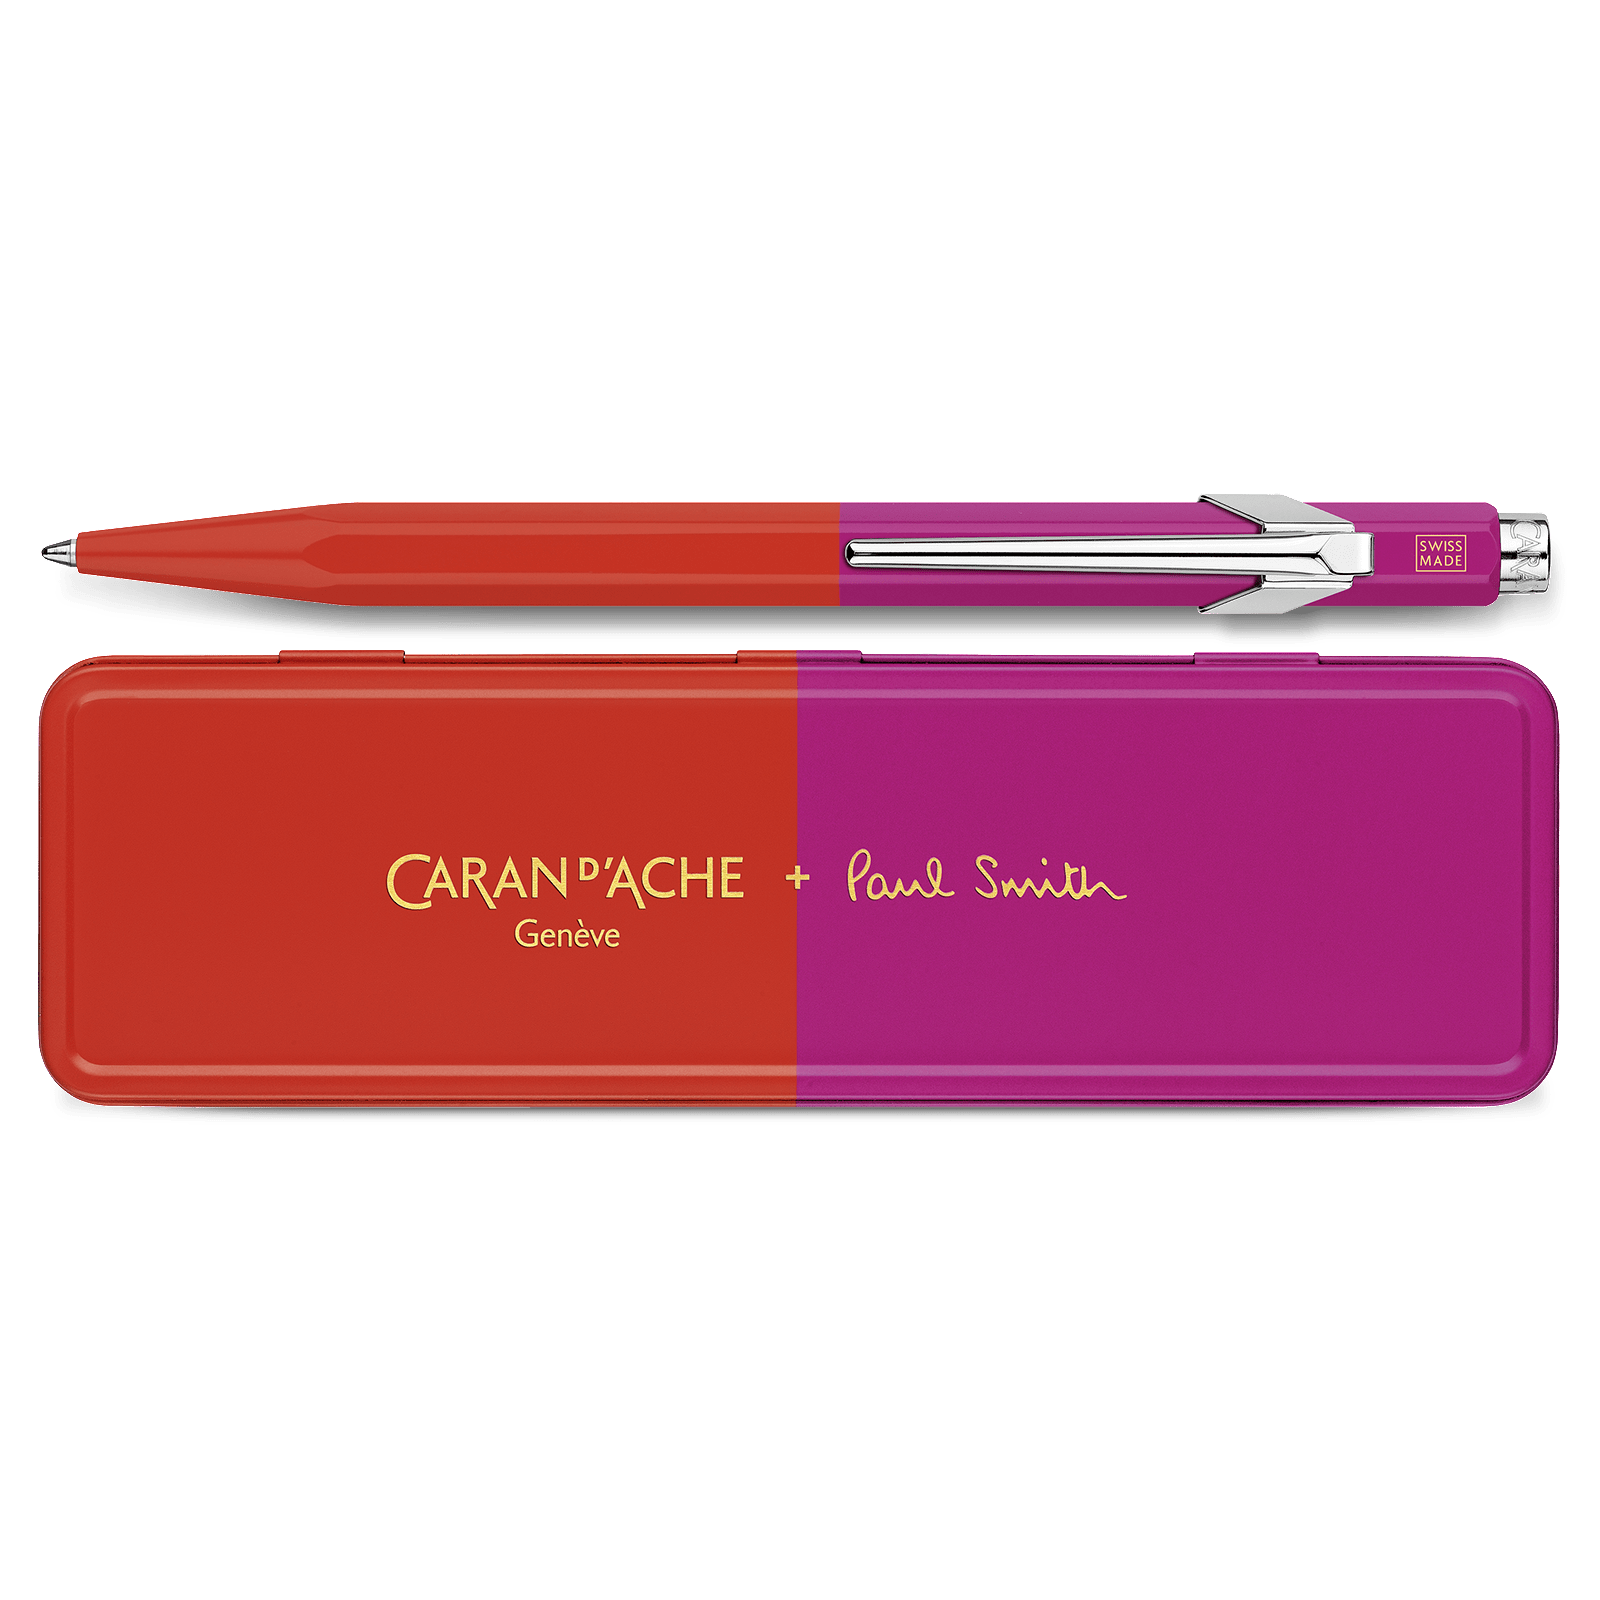 Caran D'Ache + Paul Smith Edition 4 849 Limited Edition Warm Red Melrose Pink Ballpoint Pen - Pencraft the boutique